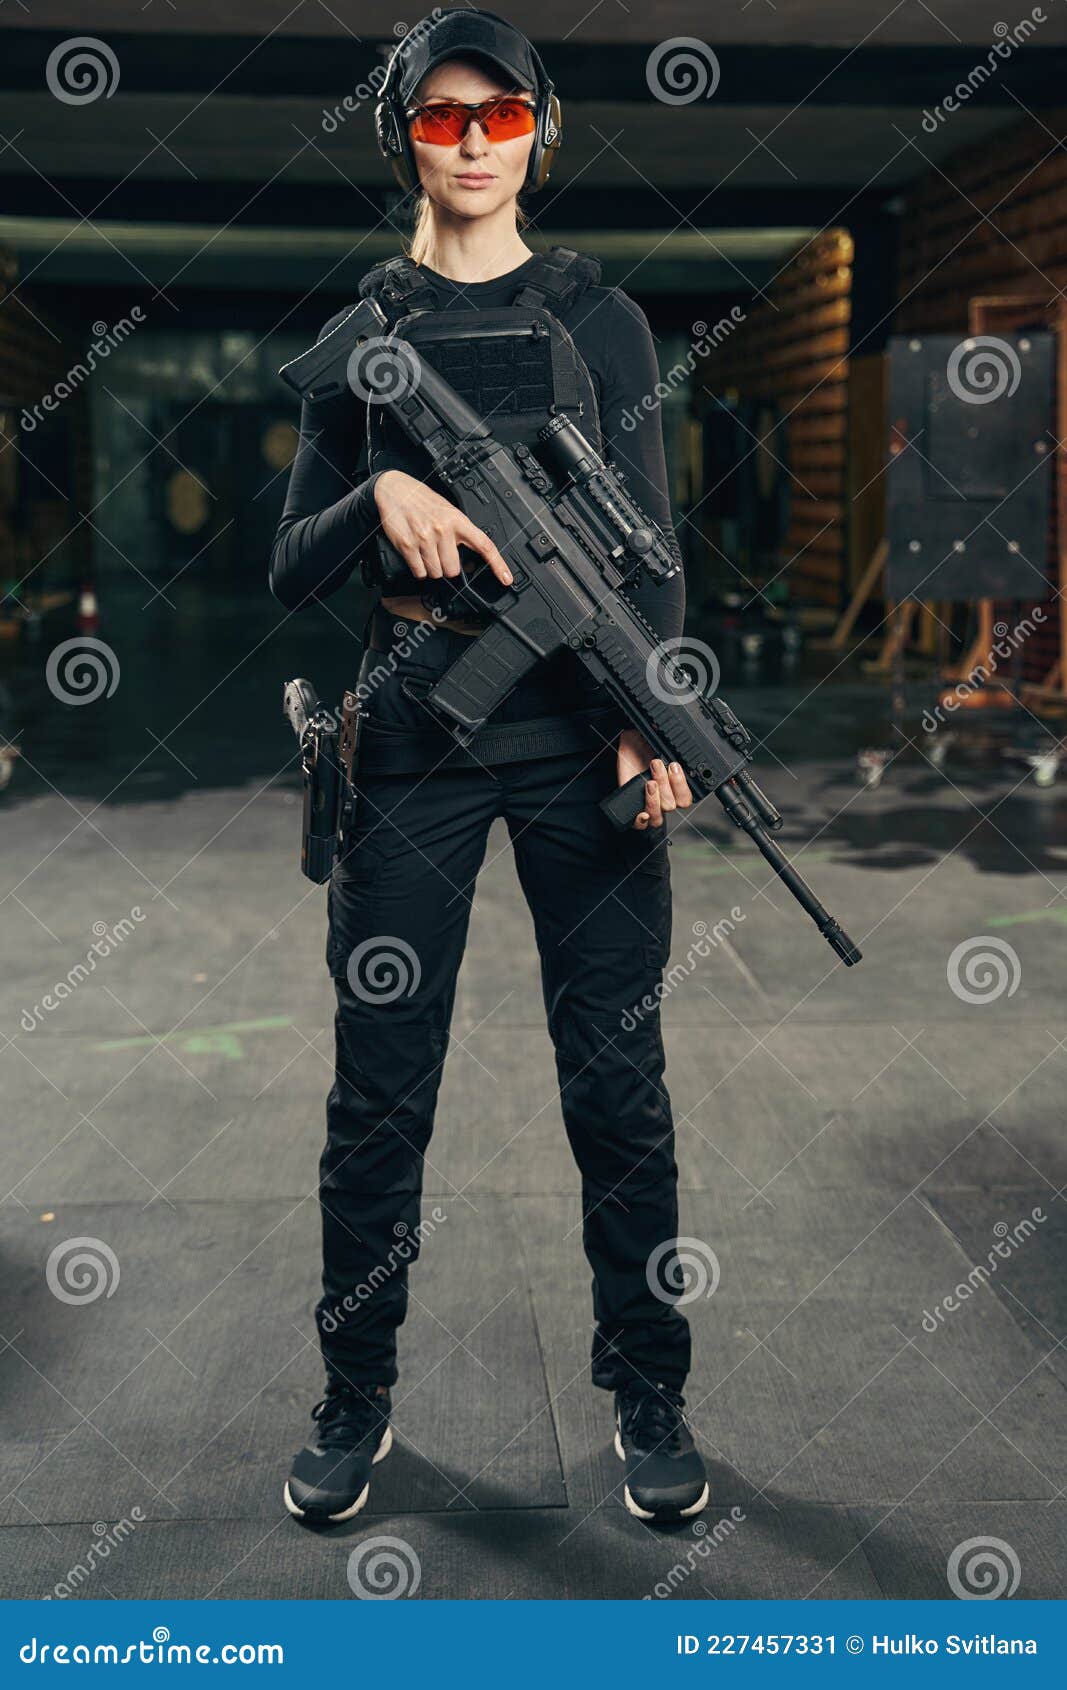 Serene Military Woman with a Firearm Looking Ahead Stock Image - Image